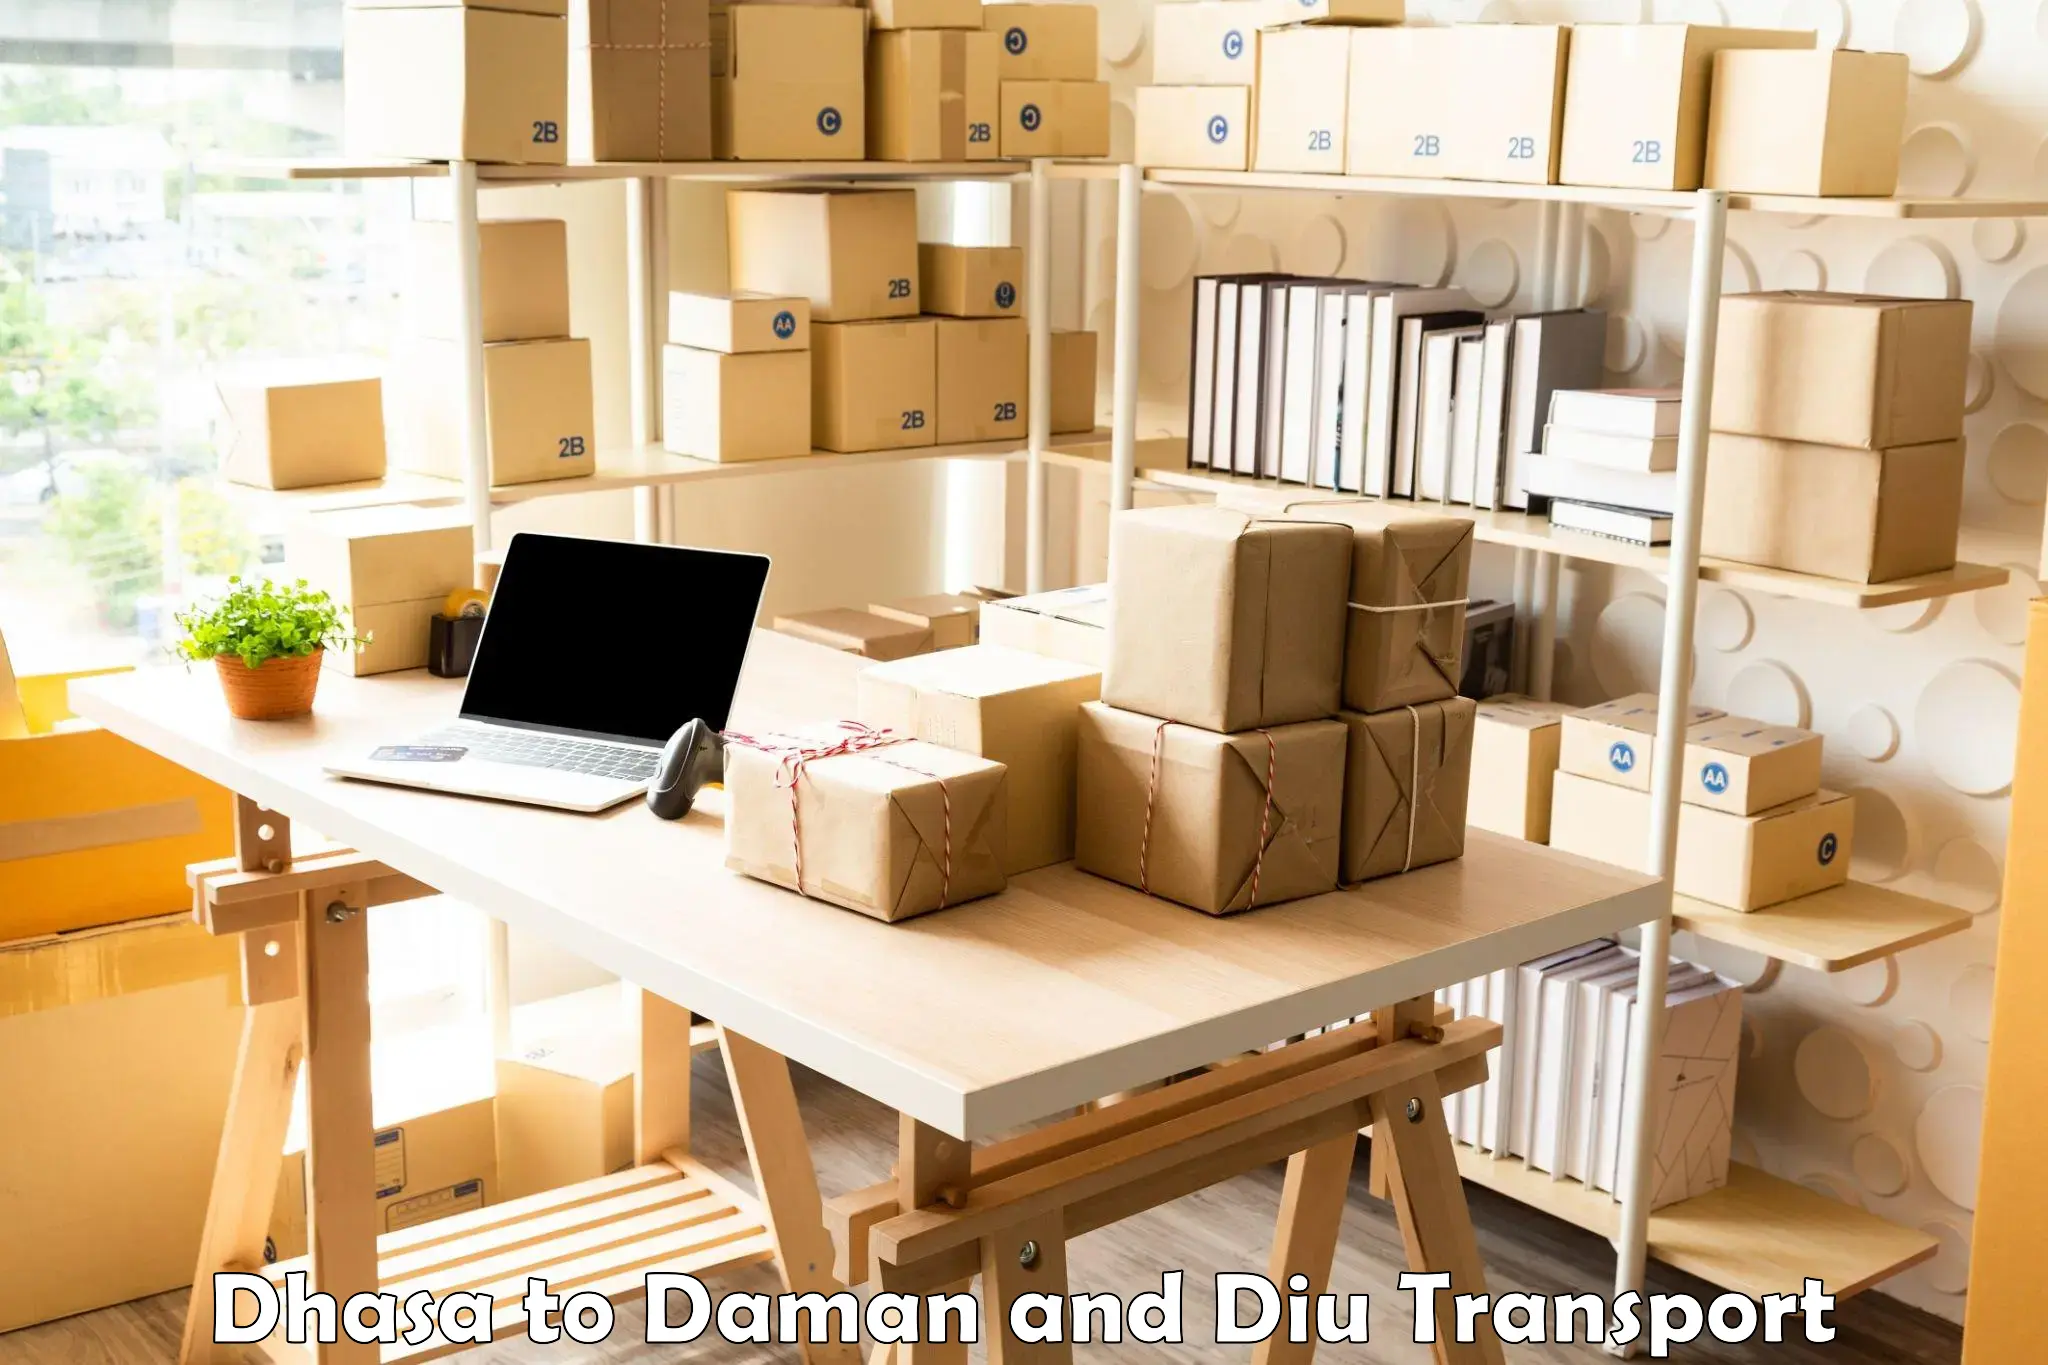 Transportation solution services Dhasa to Daman and Diu